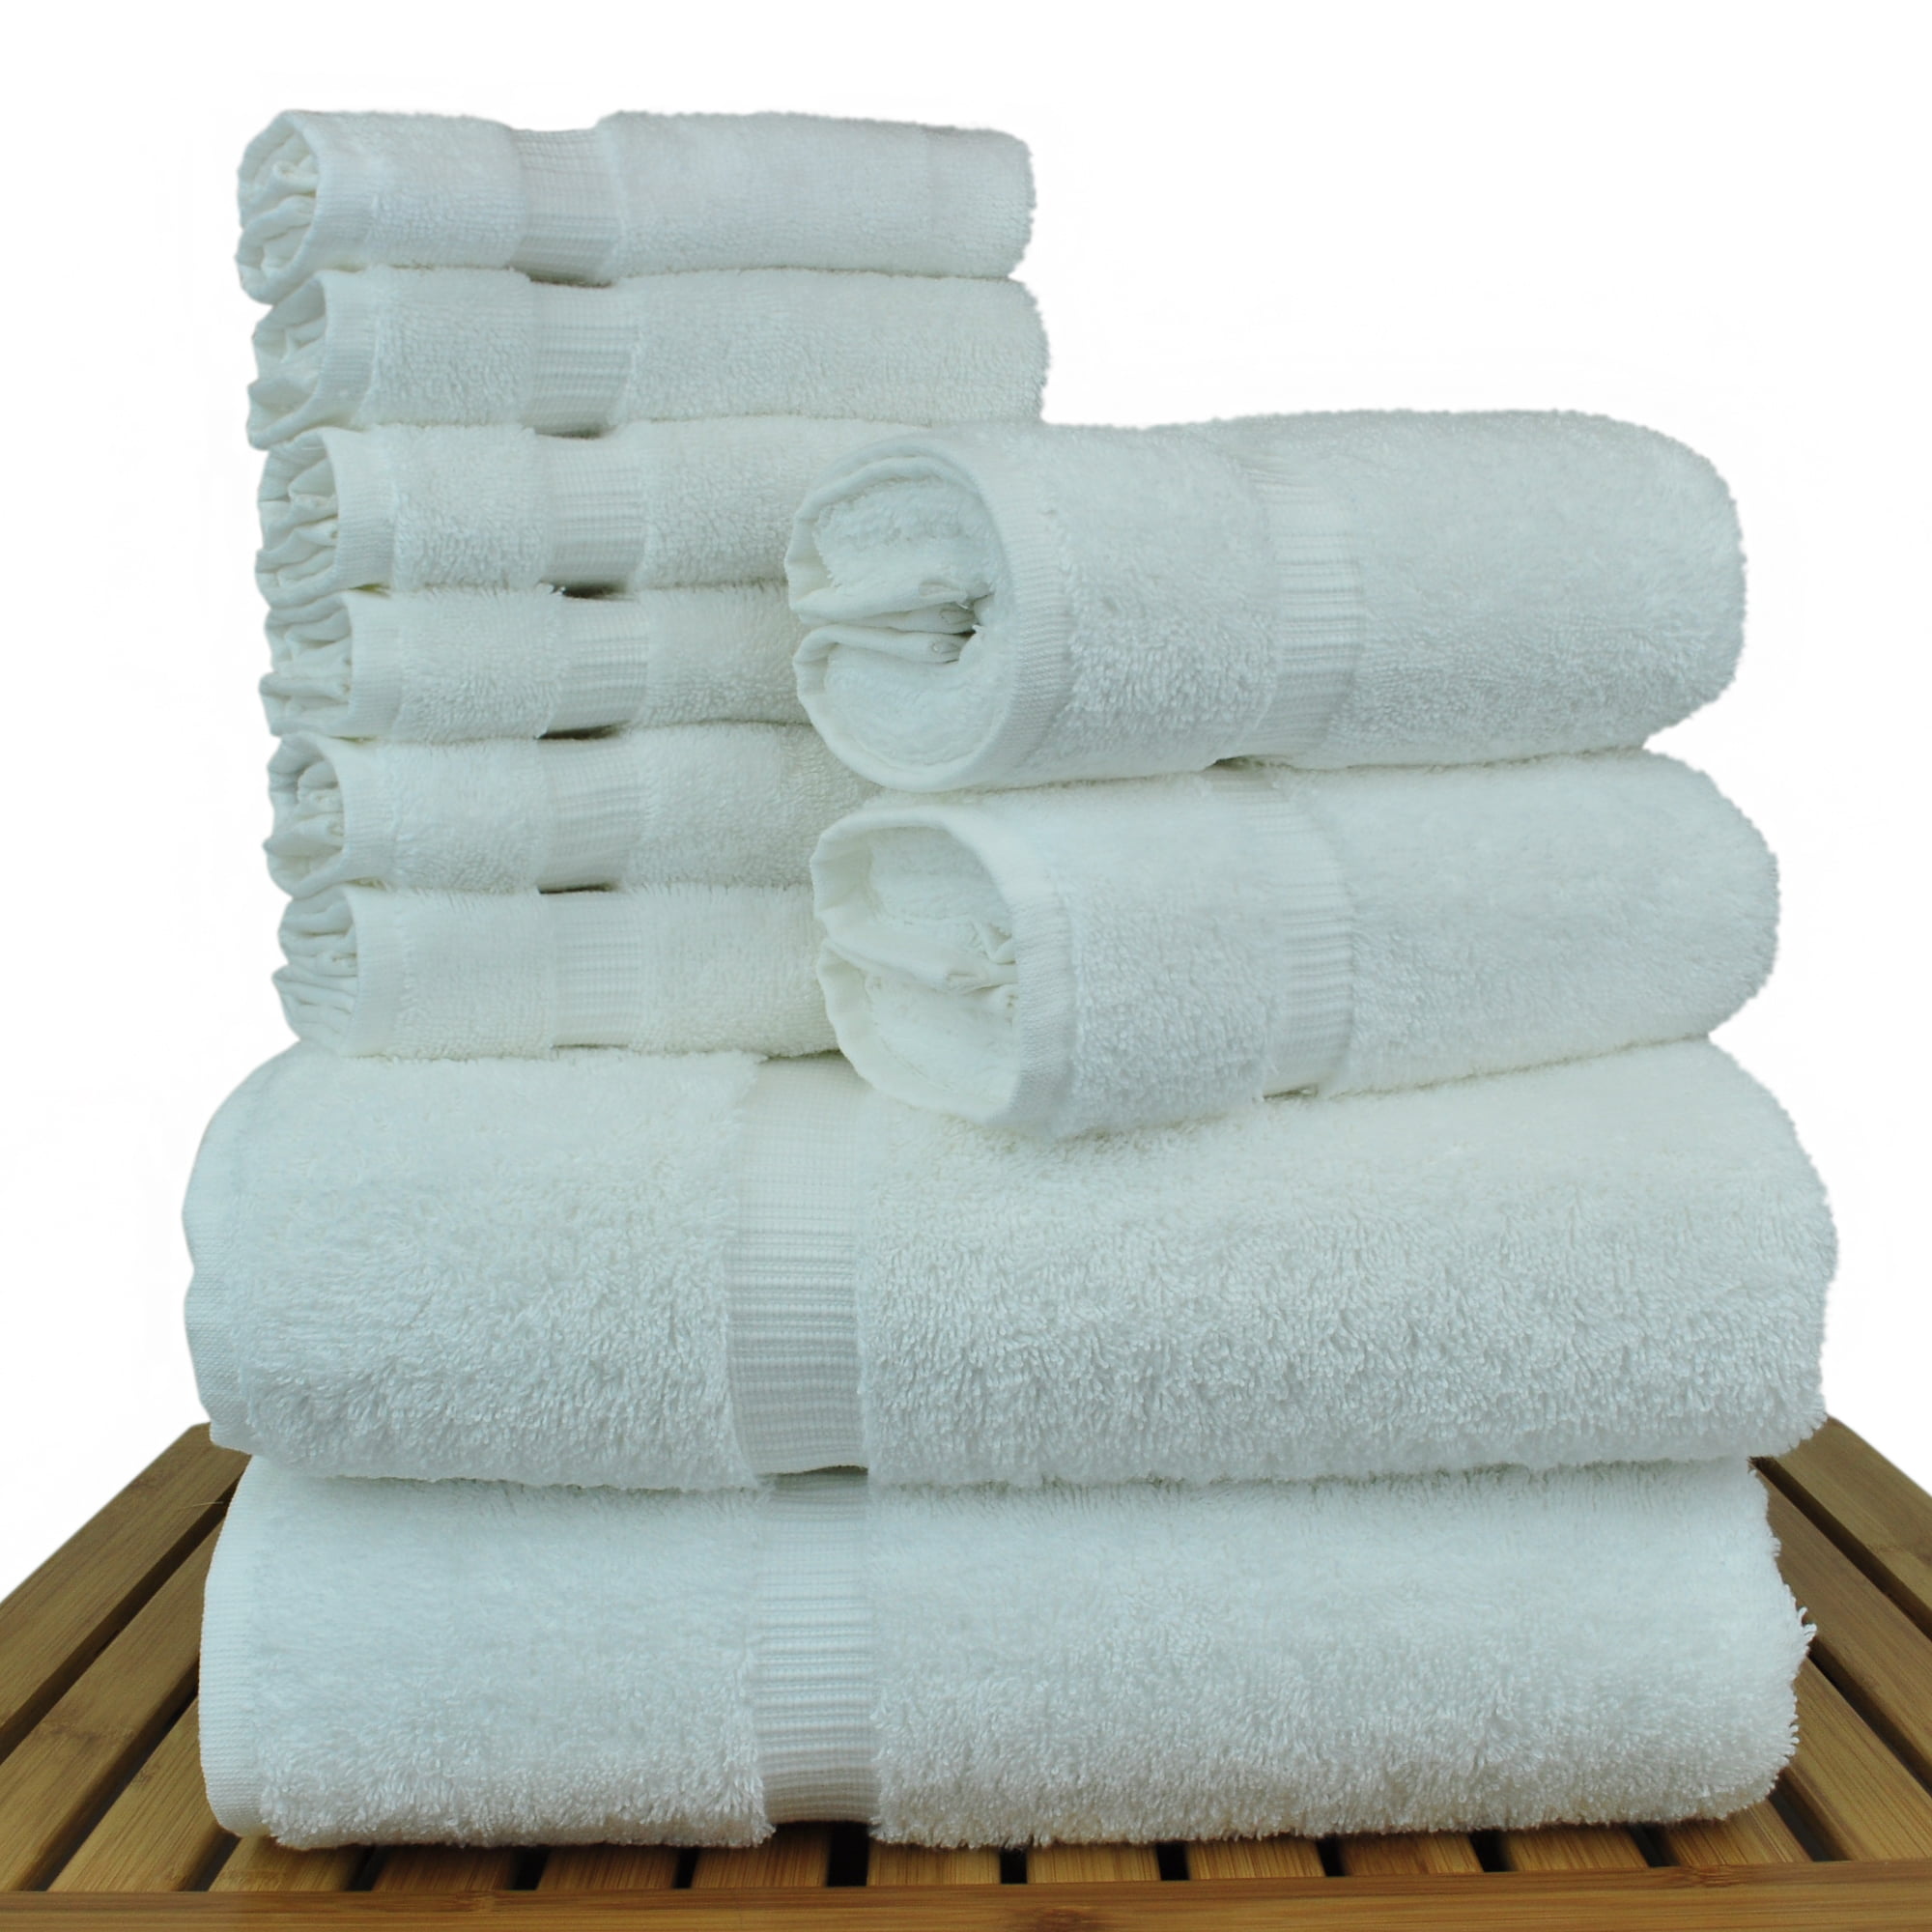 All Design Towels White Bath Towels 27 x 54 Quick-Dry High Absorbent 100% Turkish Cotton Towel for Bathroom, Guests, Pool, Gym, Camp, Travel, Co